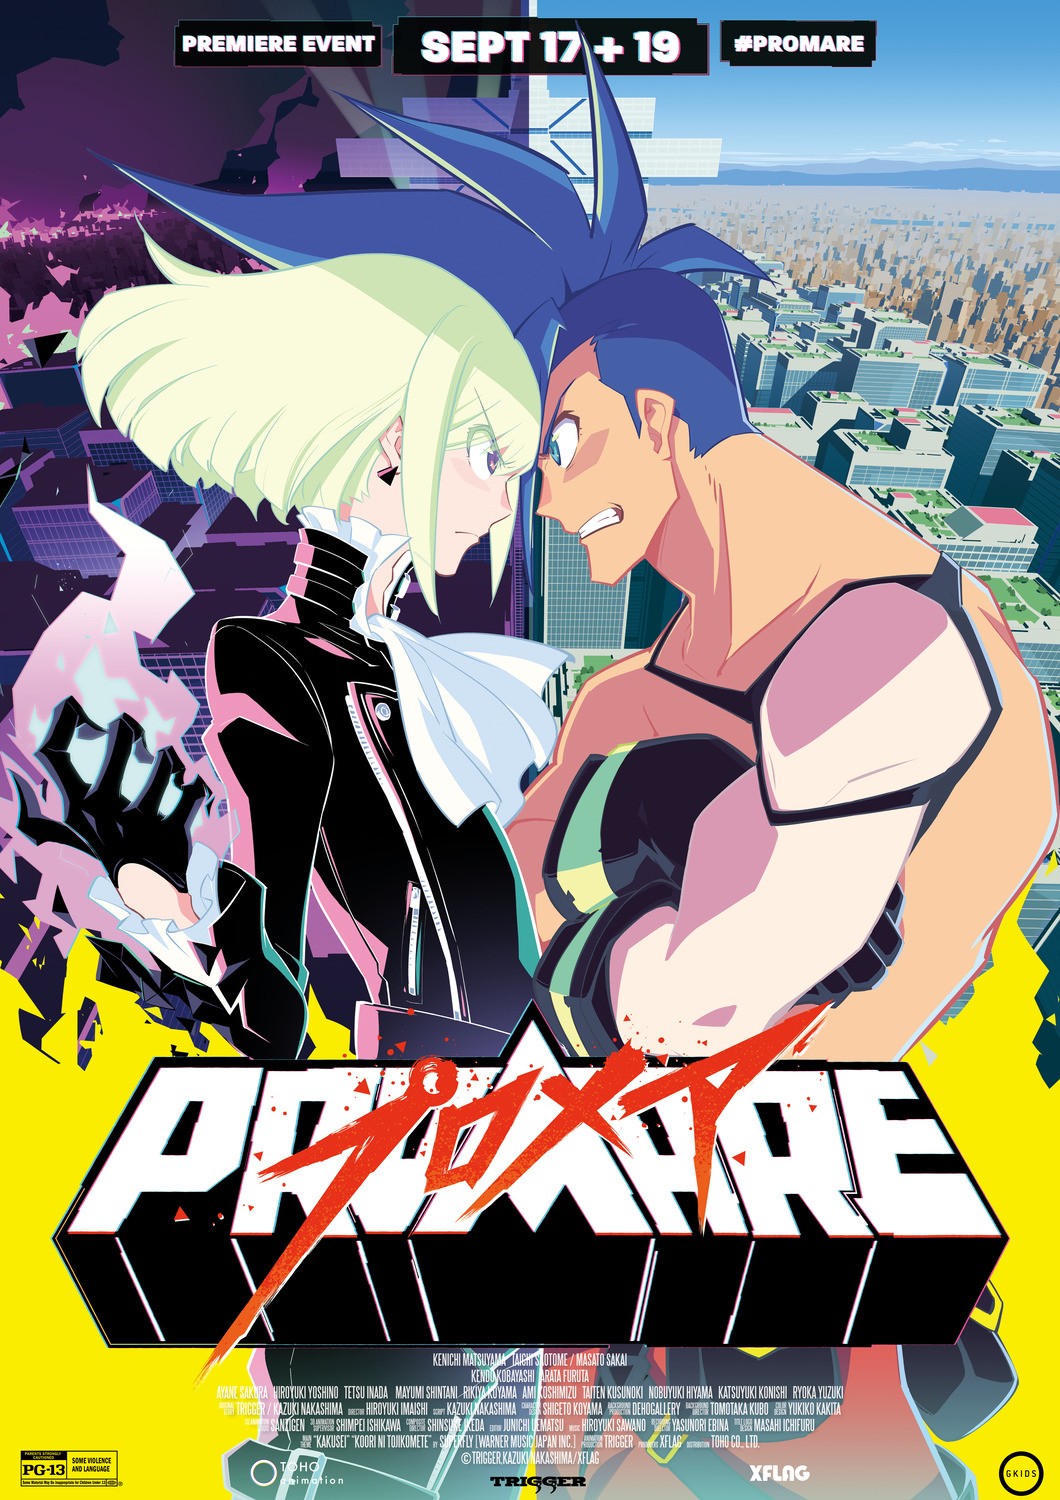 Ghibliotheque presents... PROMARE